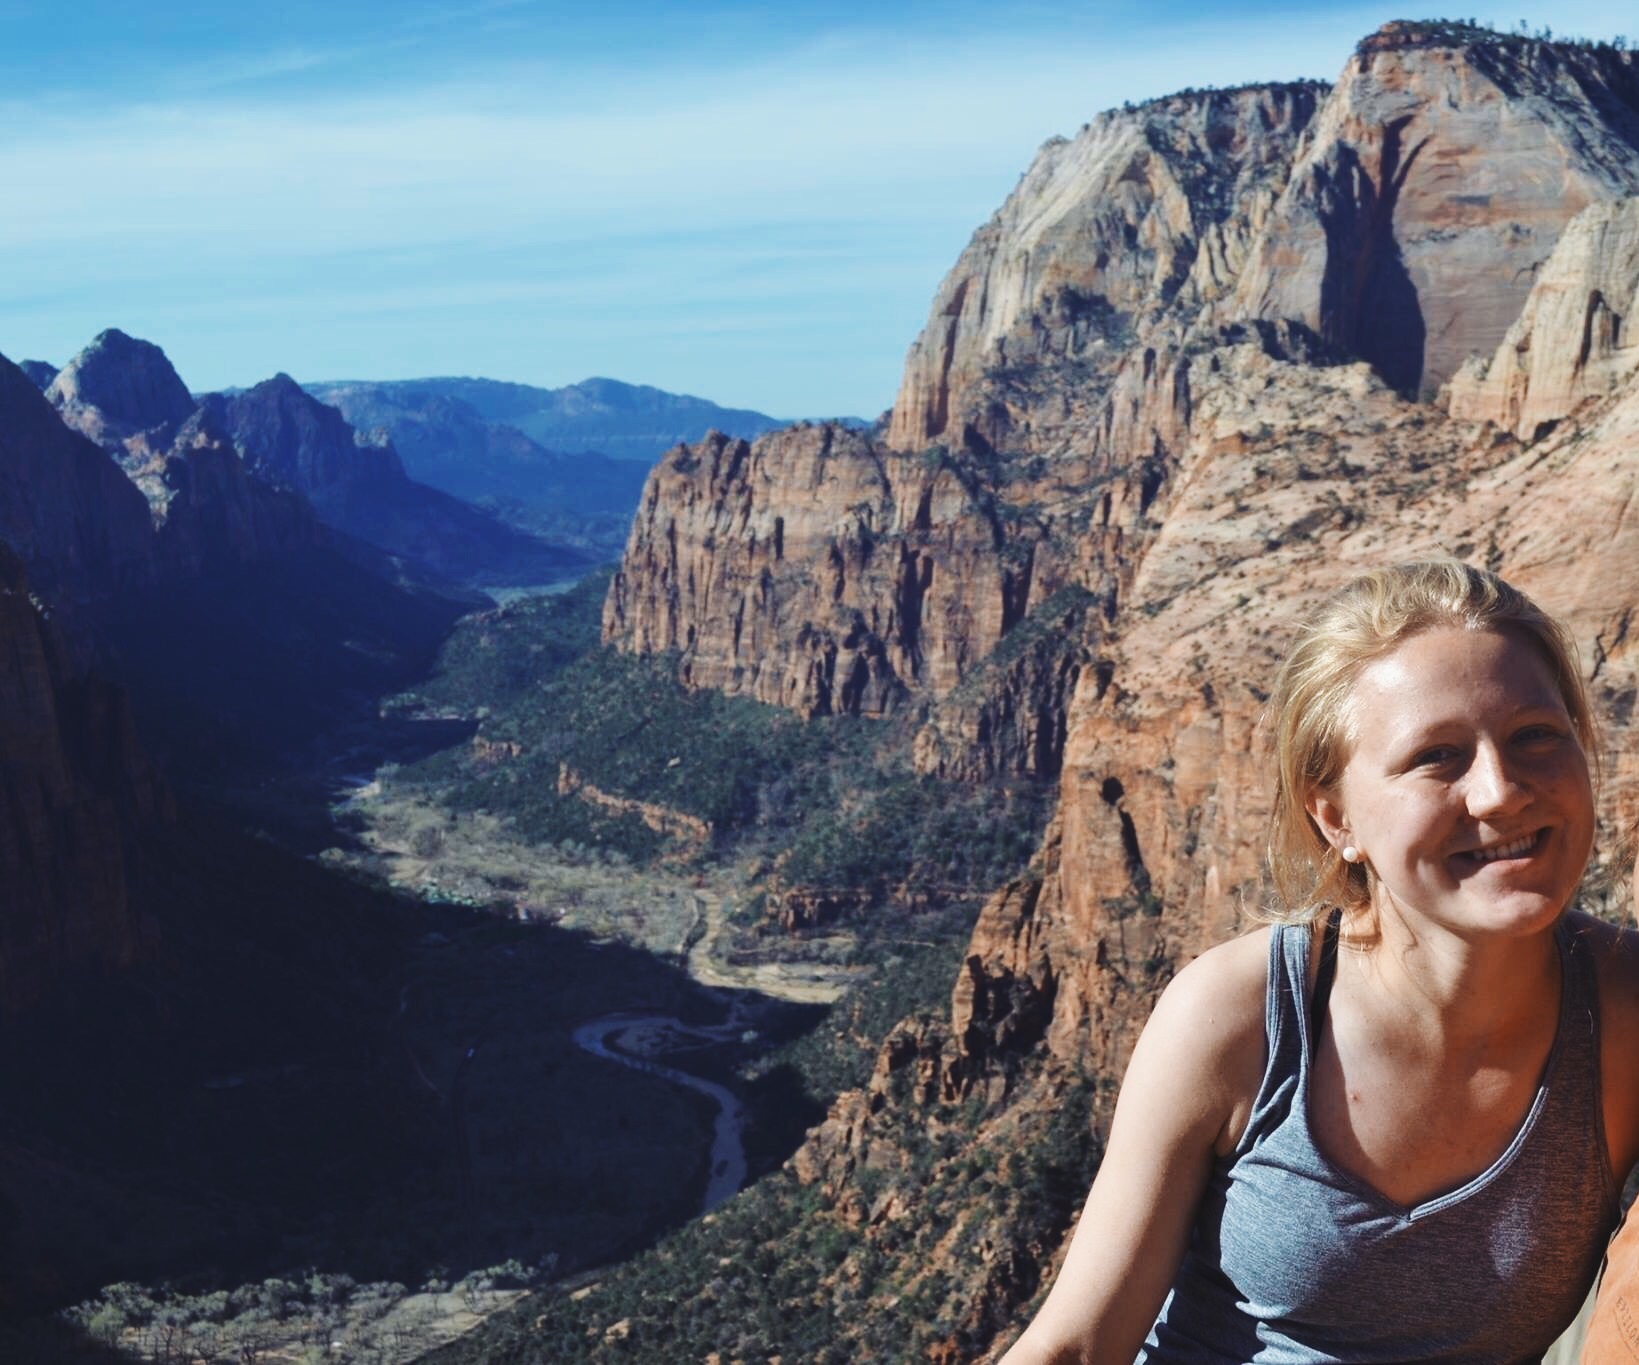 Tori Molyneaux on top of Angels Landing in Zion National Park